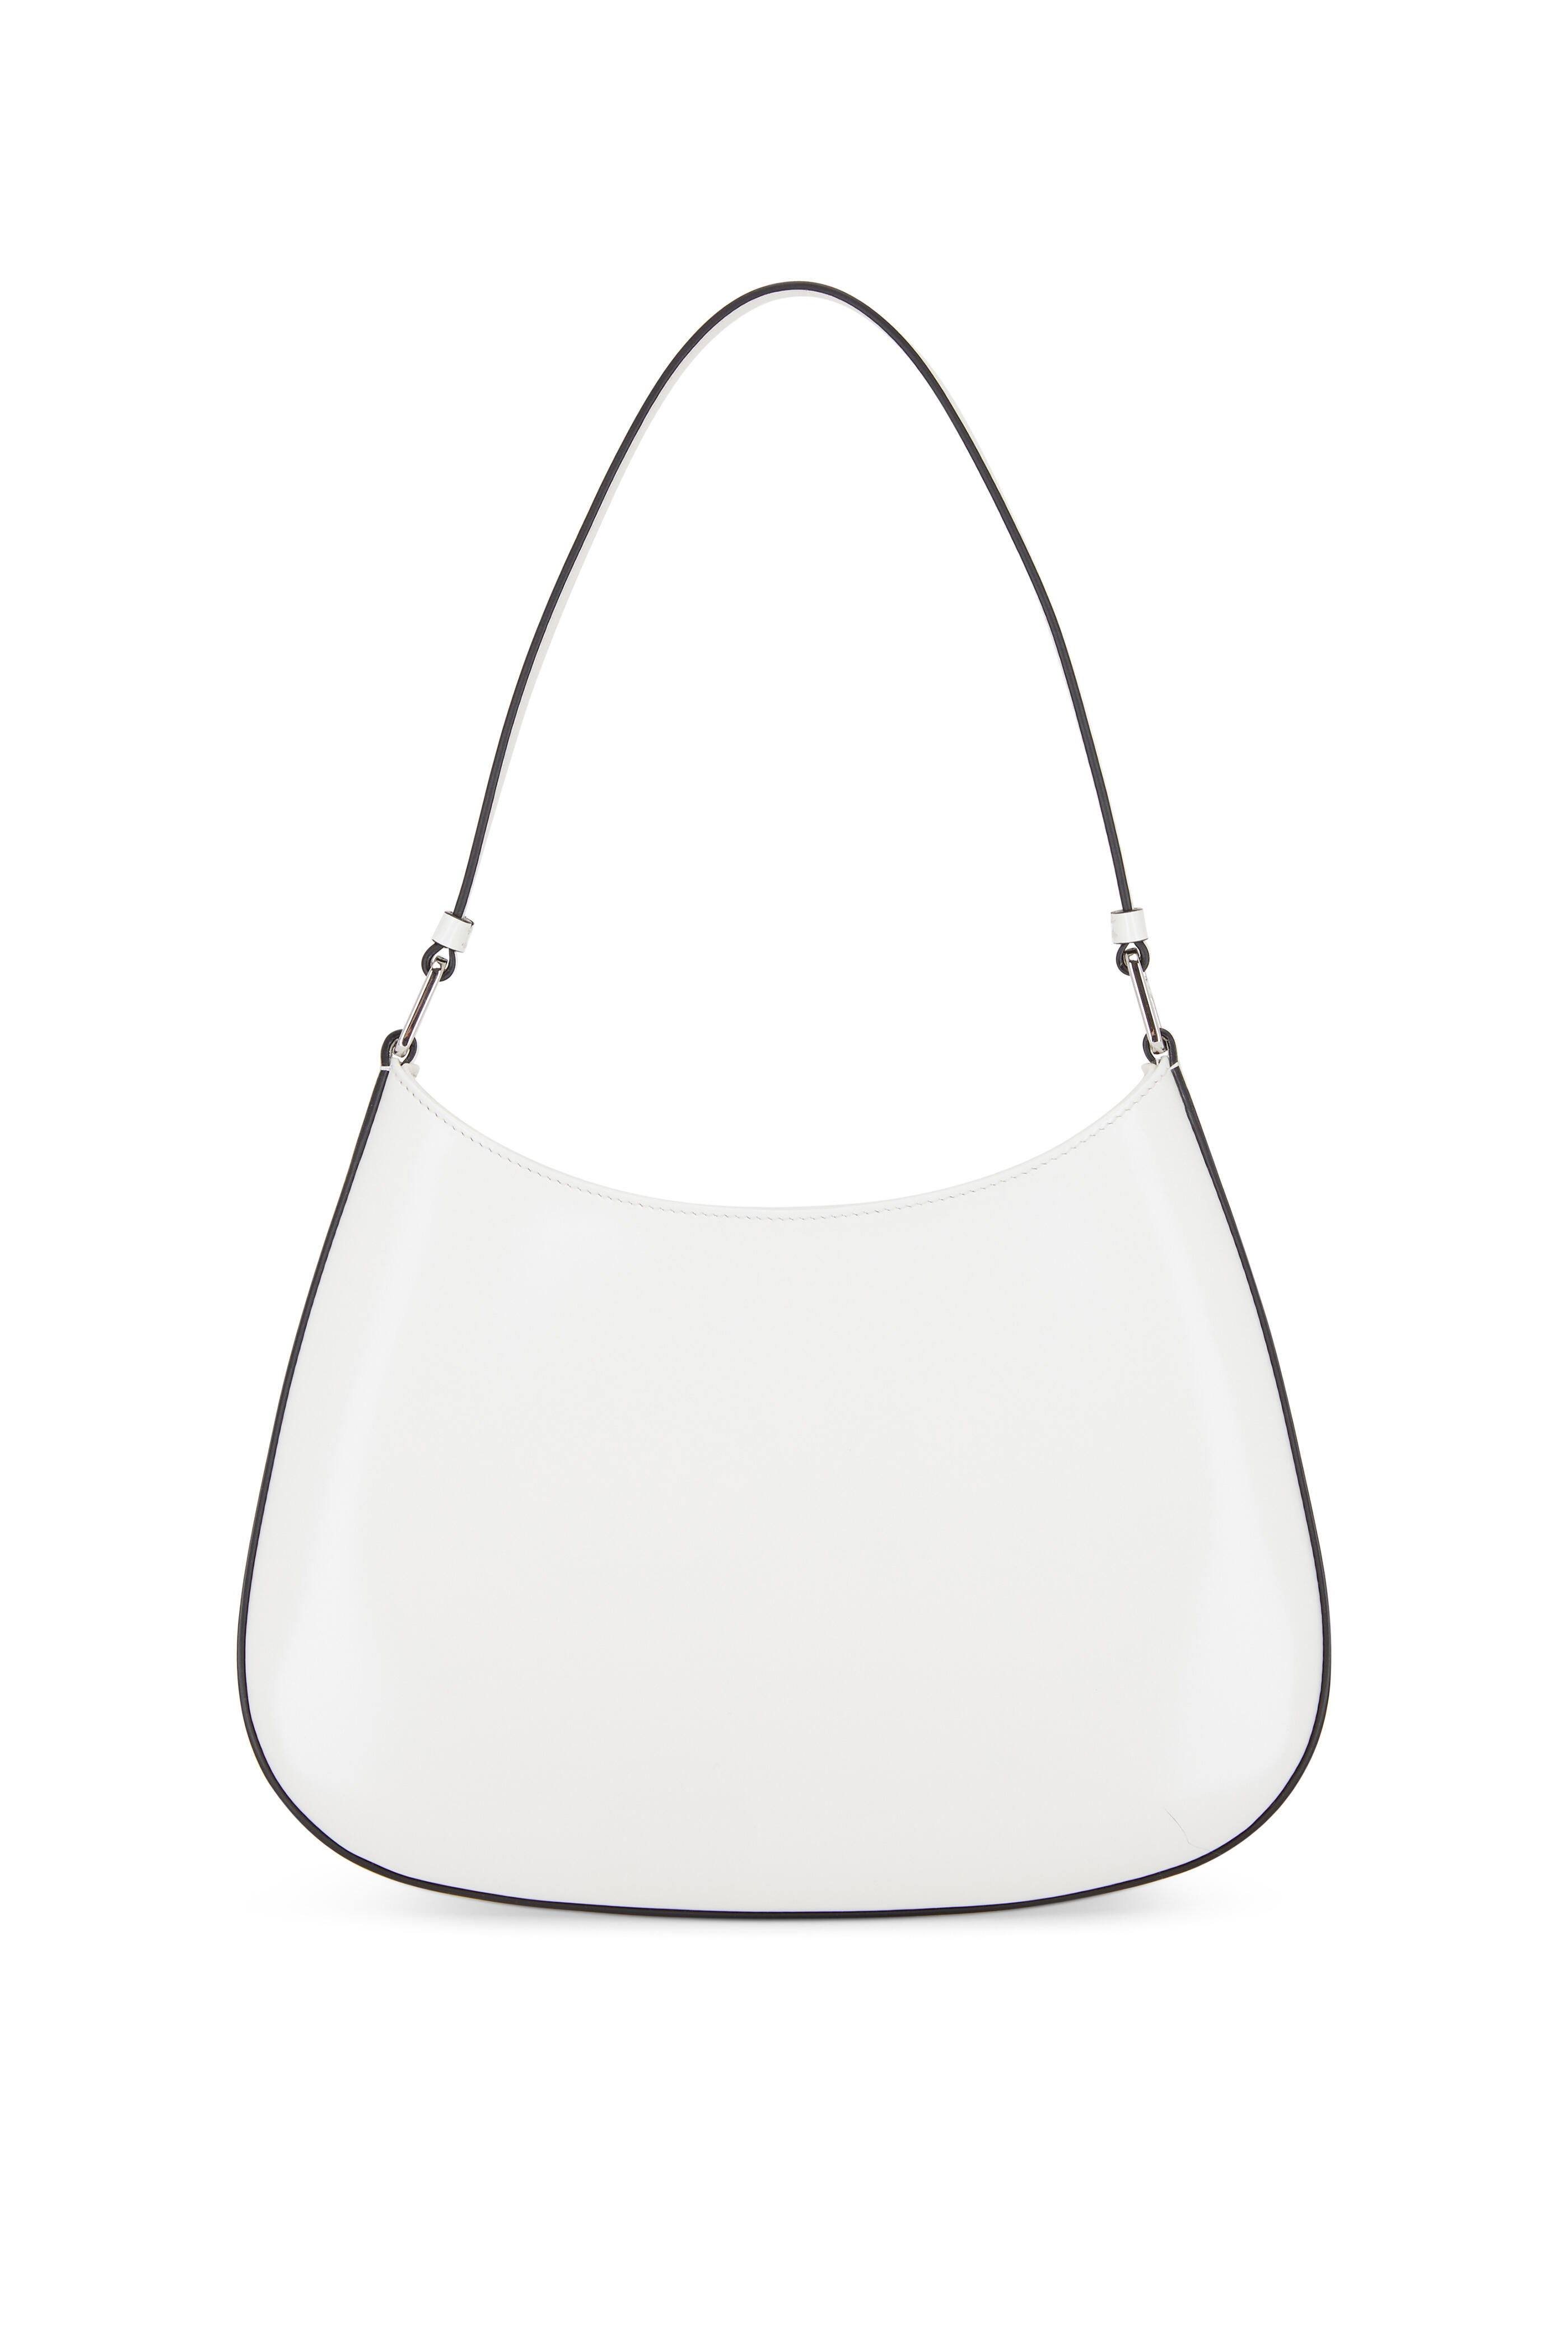 Prada Cleo Brushed Leather Shoulder Bag White in Leather with